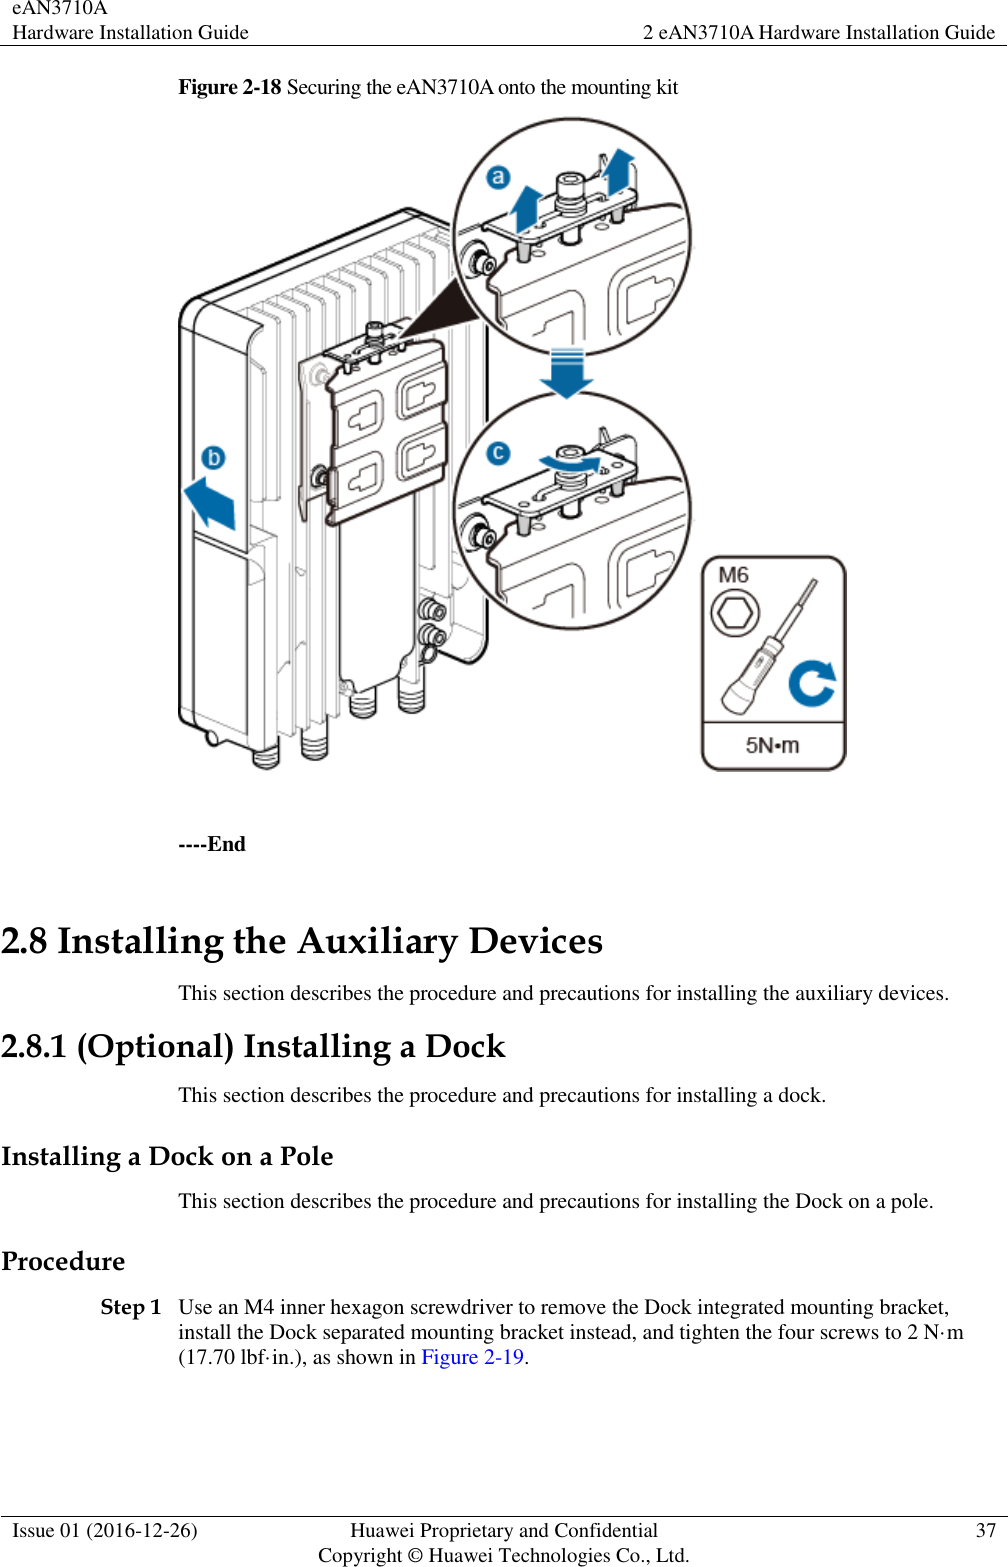 eAN3710A Hardware Installation Guide 2 eAN3710A Hardware Installation Guide  Issue 01 (2016-12-26) Huawei Proprietary and Confidential                                     Copyright © Huawei Technologies Co., Ltd. 37  Figure 2-18 Securing the eAN3710A onto the mounting kit   ----End 2.8 Installing the Auxiliary Devices This section describes the procedure and precautions for installing the auxiliary devices. 2.8.1 (Optional) Installing a Dock This section describes the procedure and precautions for installing a dock. Installing a Dock on a Pole This section describes the procedure and precautions for installing the Dock on a pole. Procedure Step 1 Use an M4 inner hexagon screwdriver to remove the Dock integrated mounting bracket, install the Dock separated mounting bracket instead, and tighten the four screws to 2 N·m (17.70 lbf·in.), as shown in Figure 2-19. 